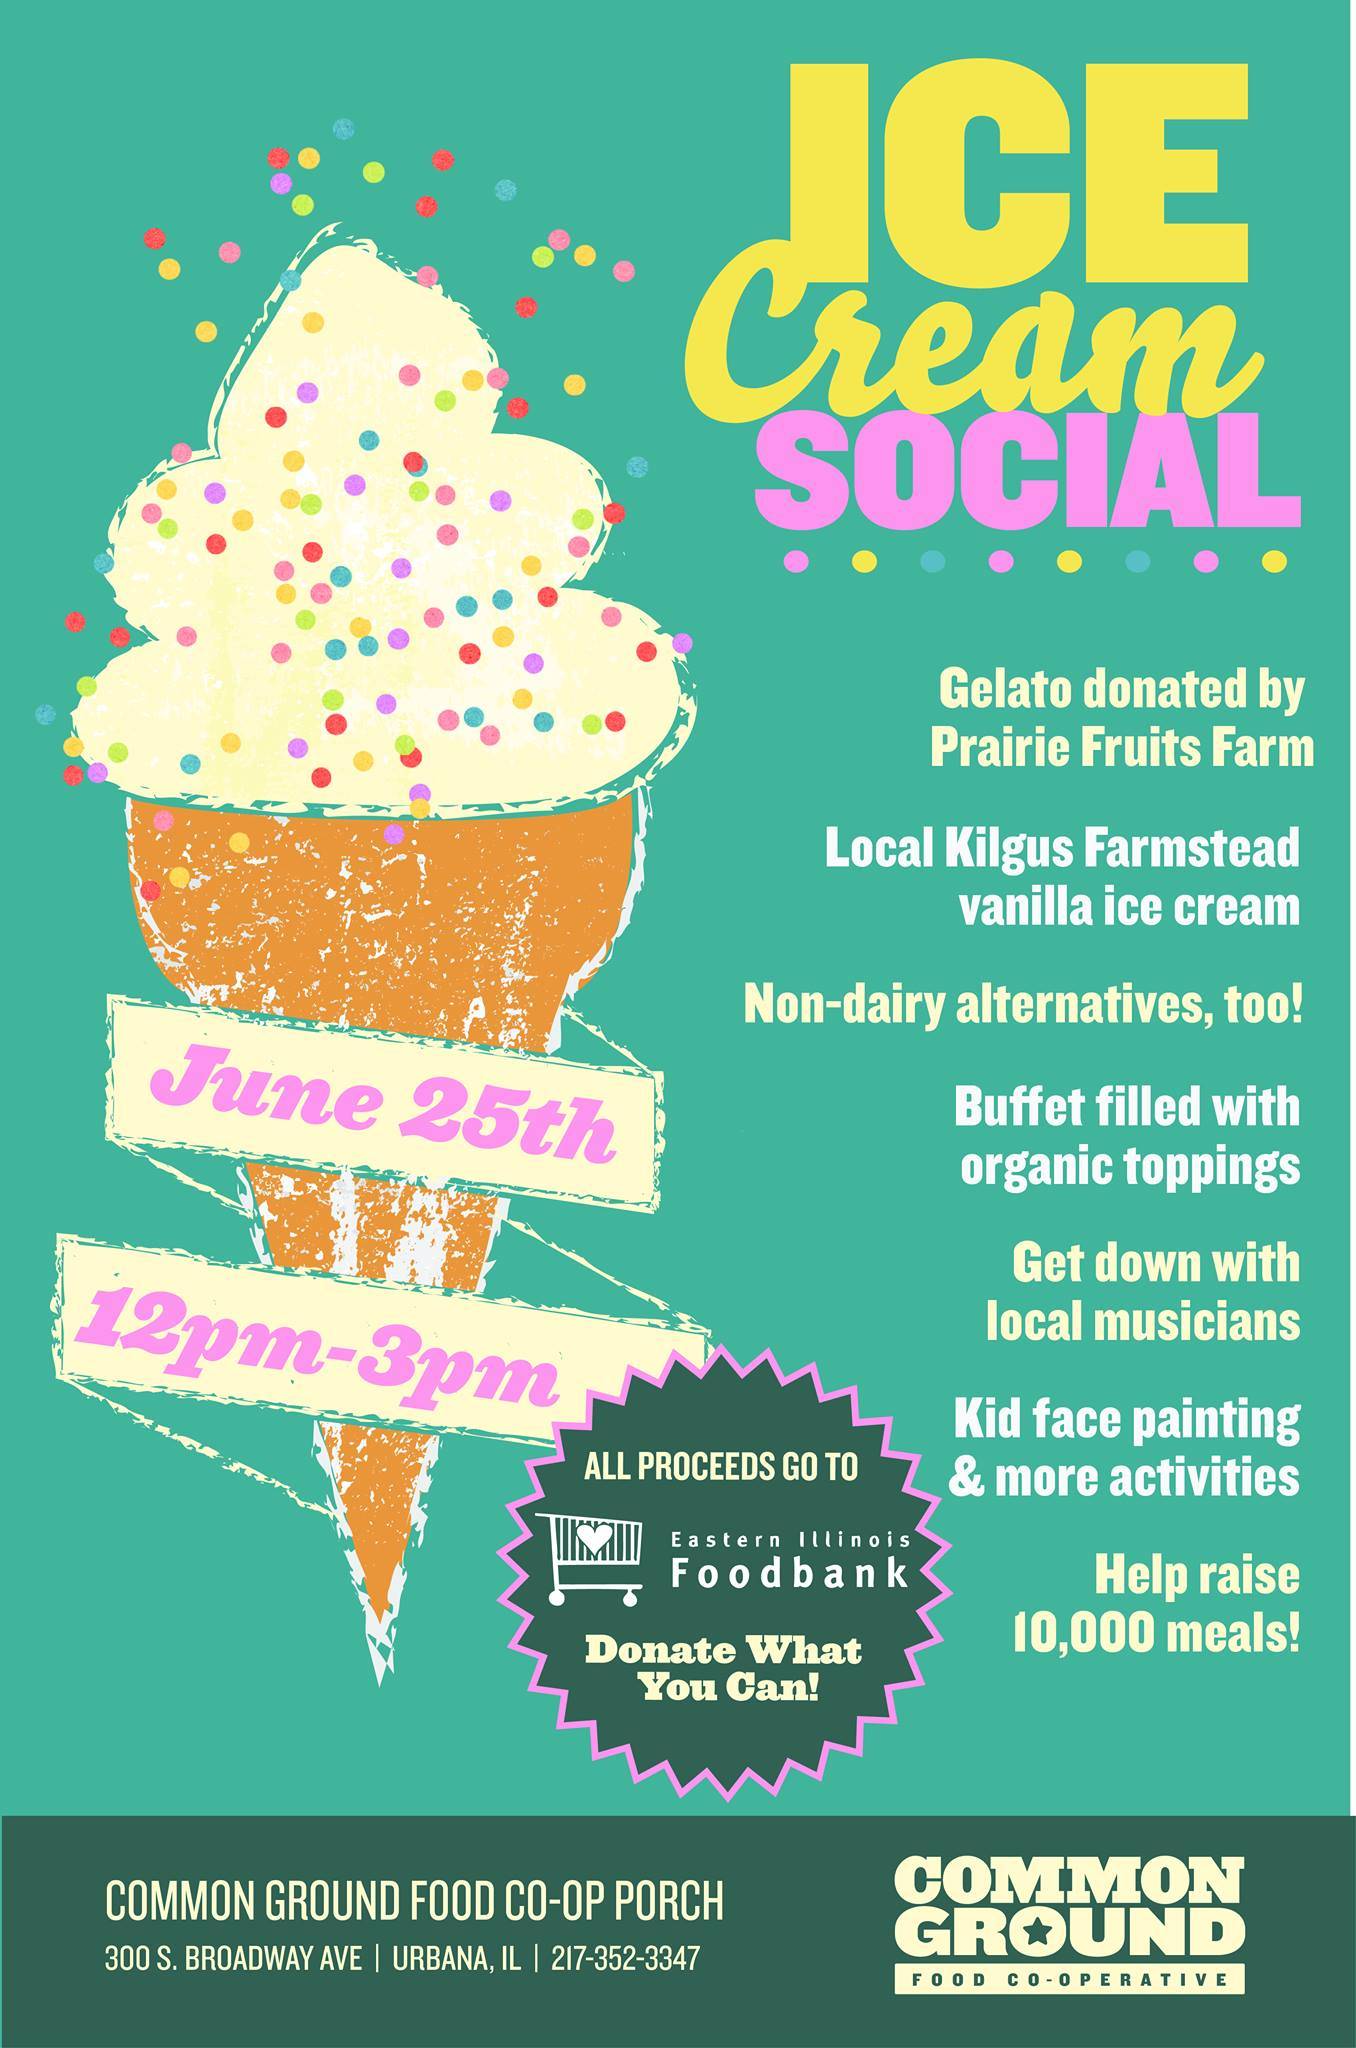 Common Ground Food Co-op hosting ice cream social benefit this Sunday